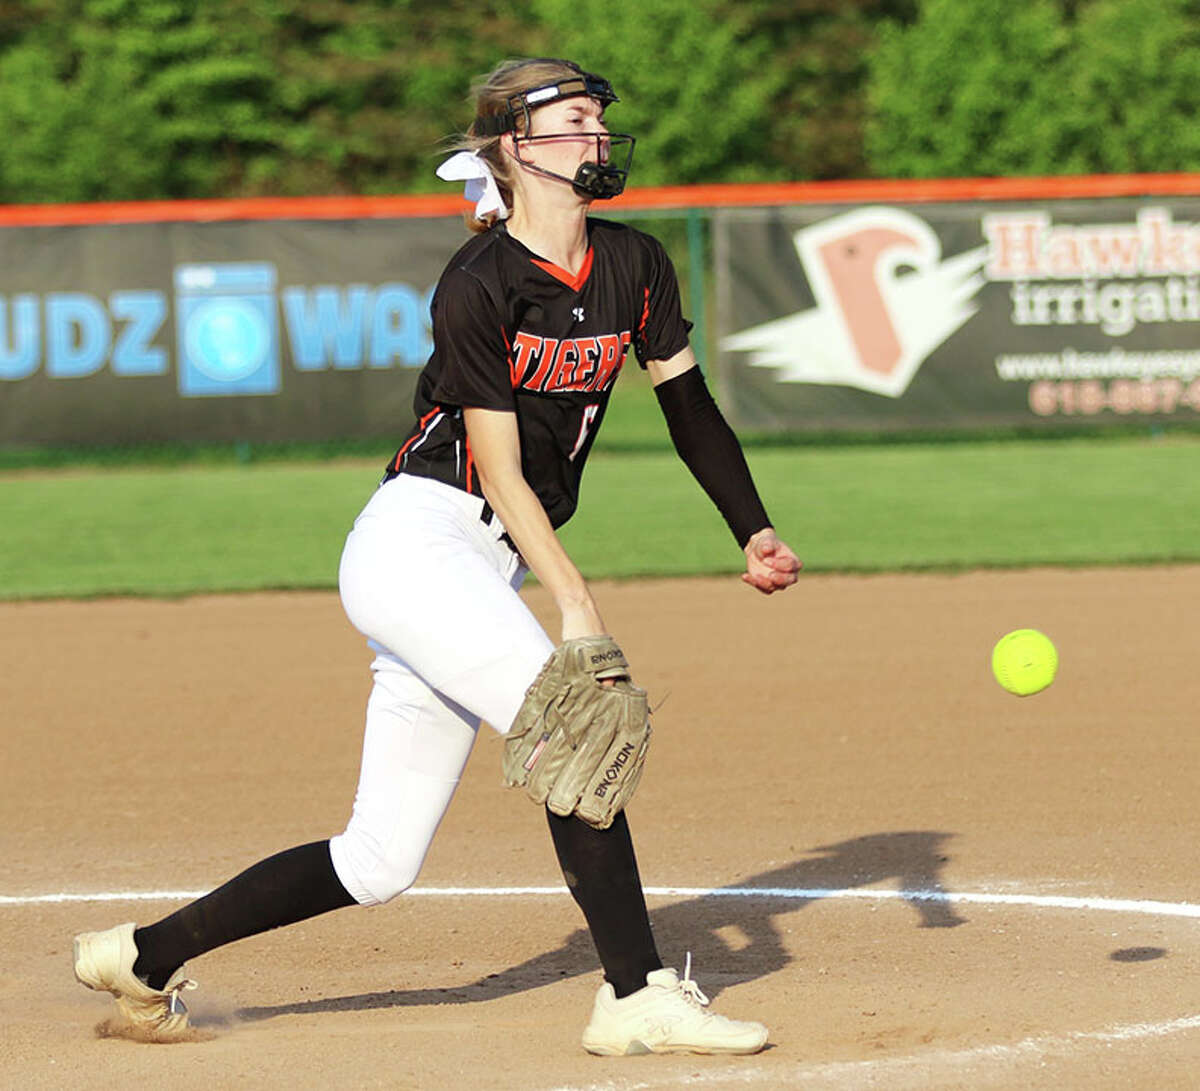 Edwardsville left-hander Ryleigh Owens pitches in a game last season at the District 7 Sports Complex in Edwardsville.